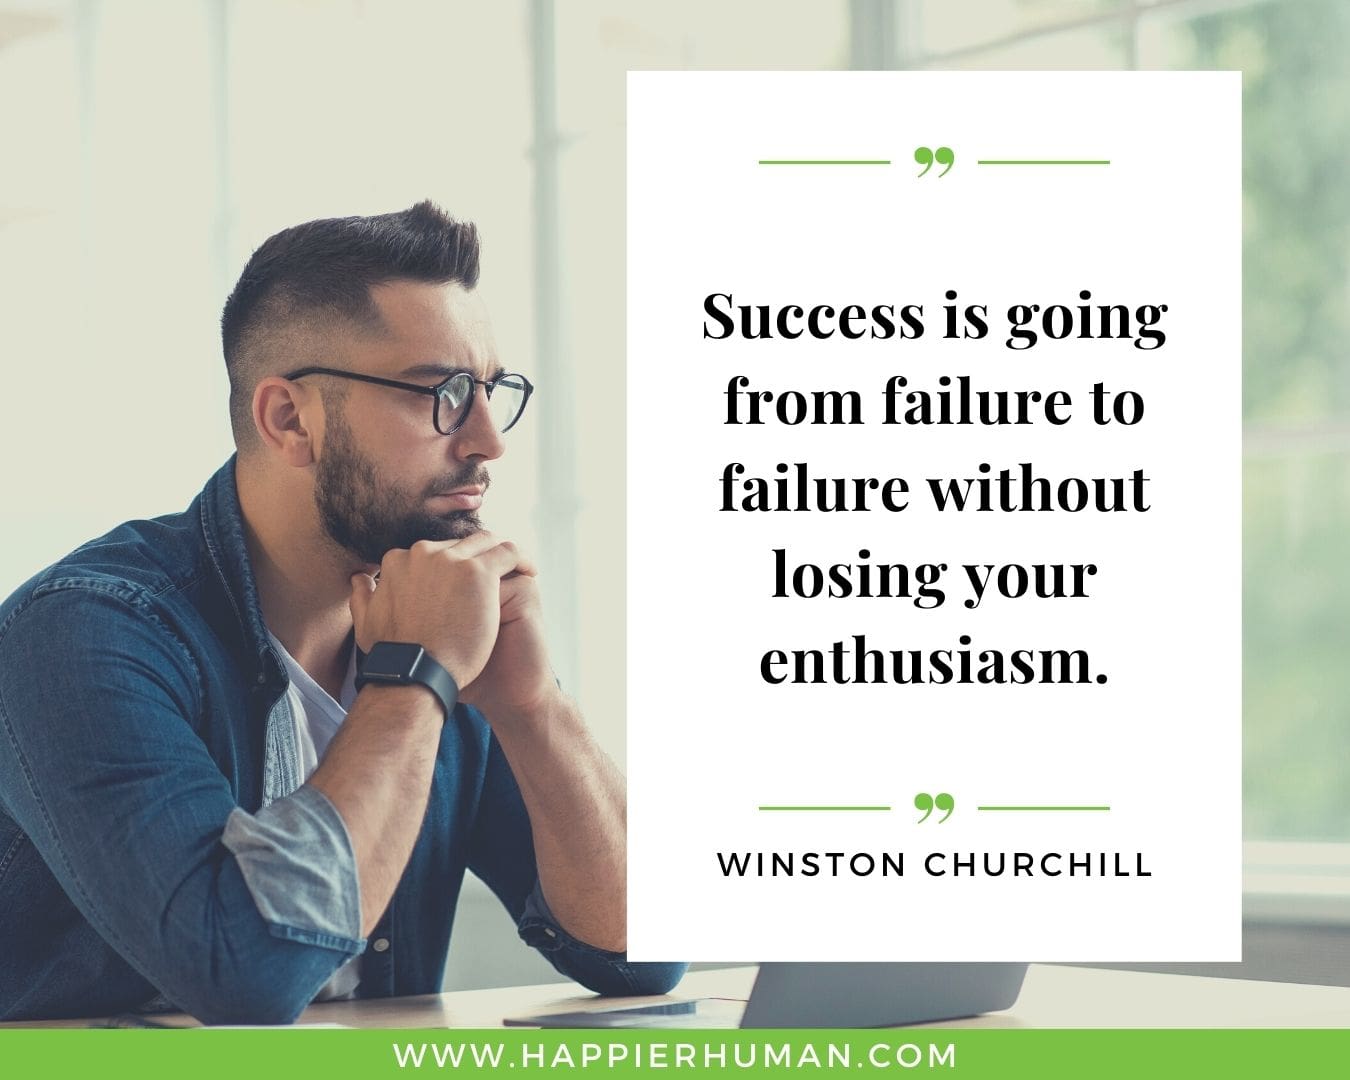 Overthinking Quotes - "Success is going from failure to failure without losing your enthusiasm." - Winston Churchil